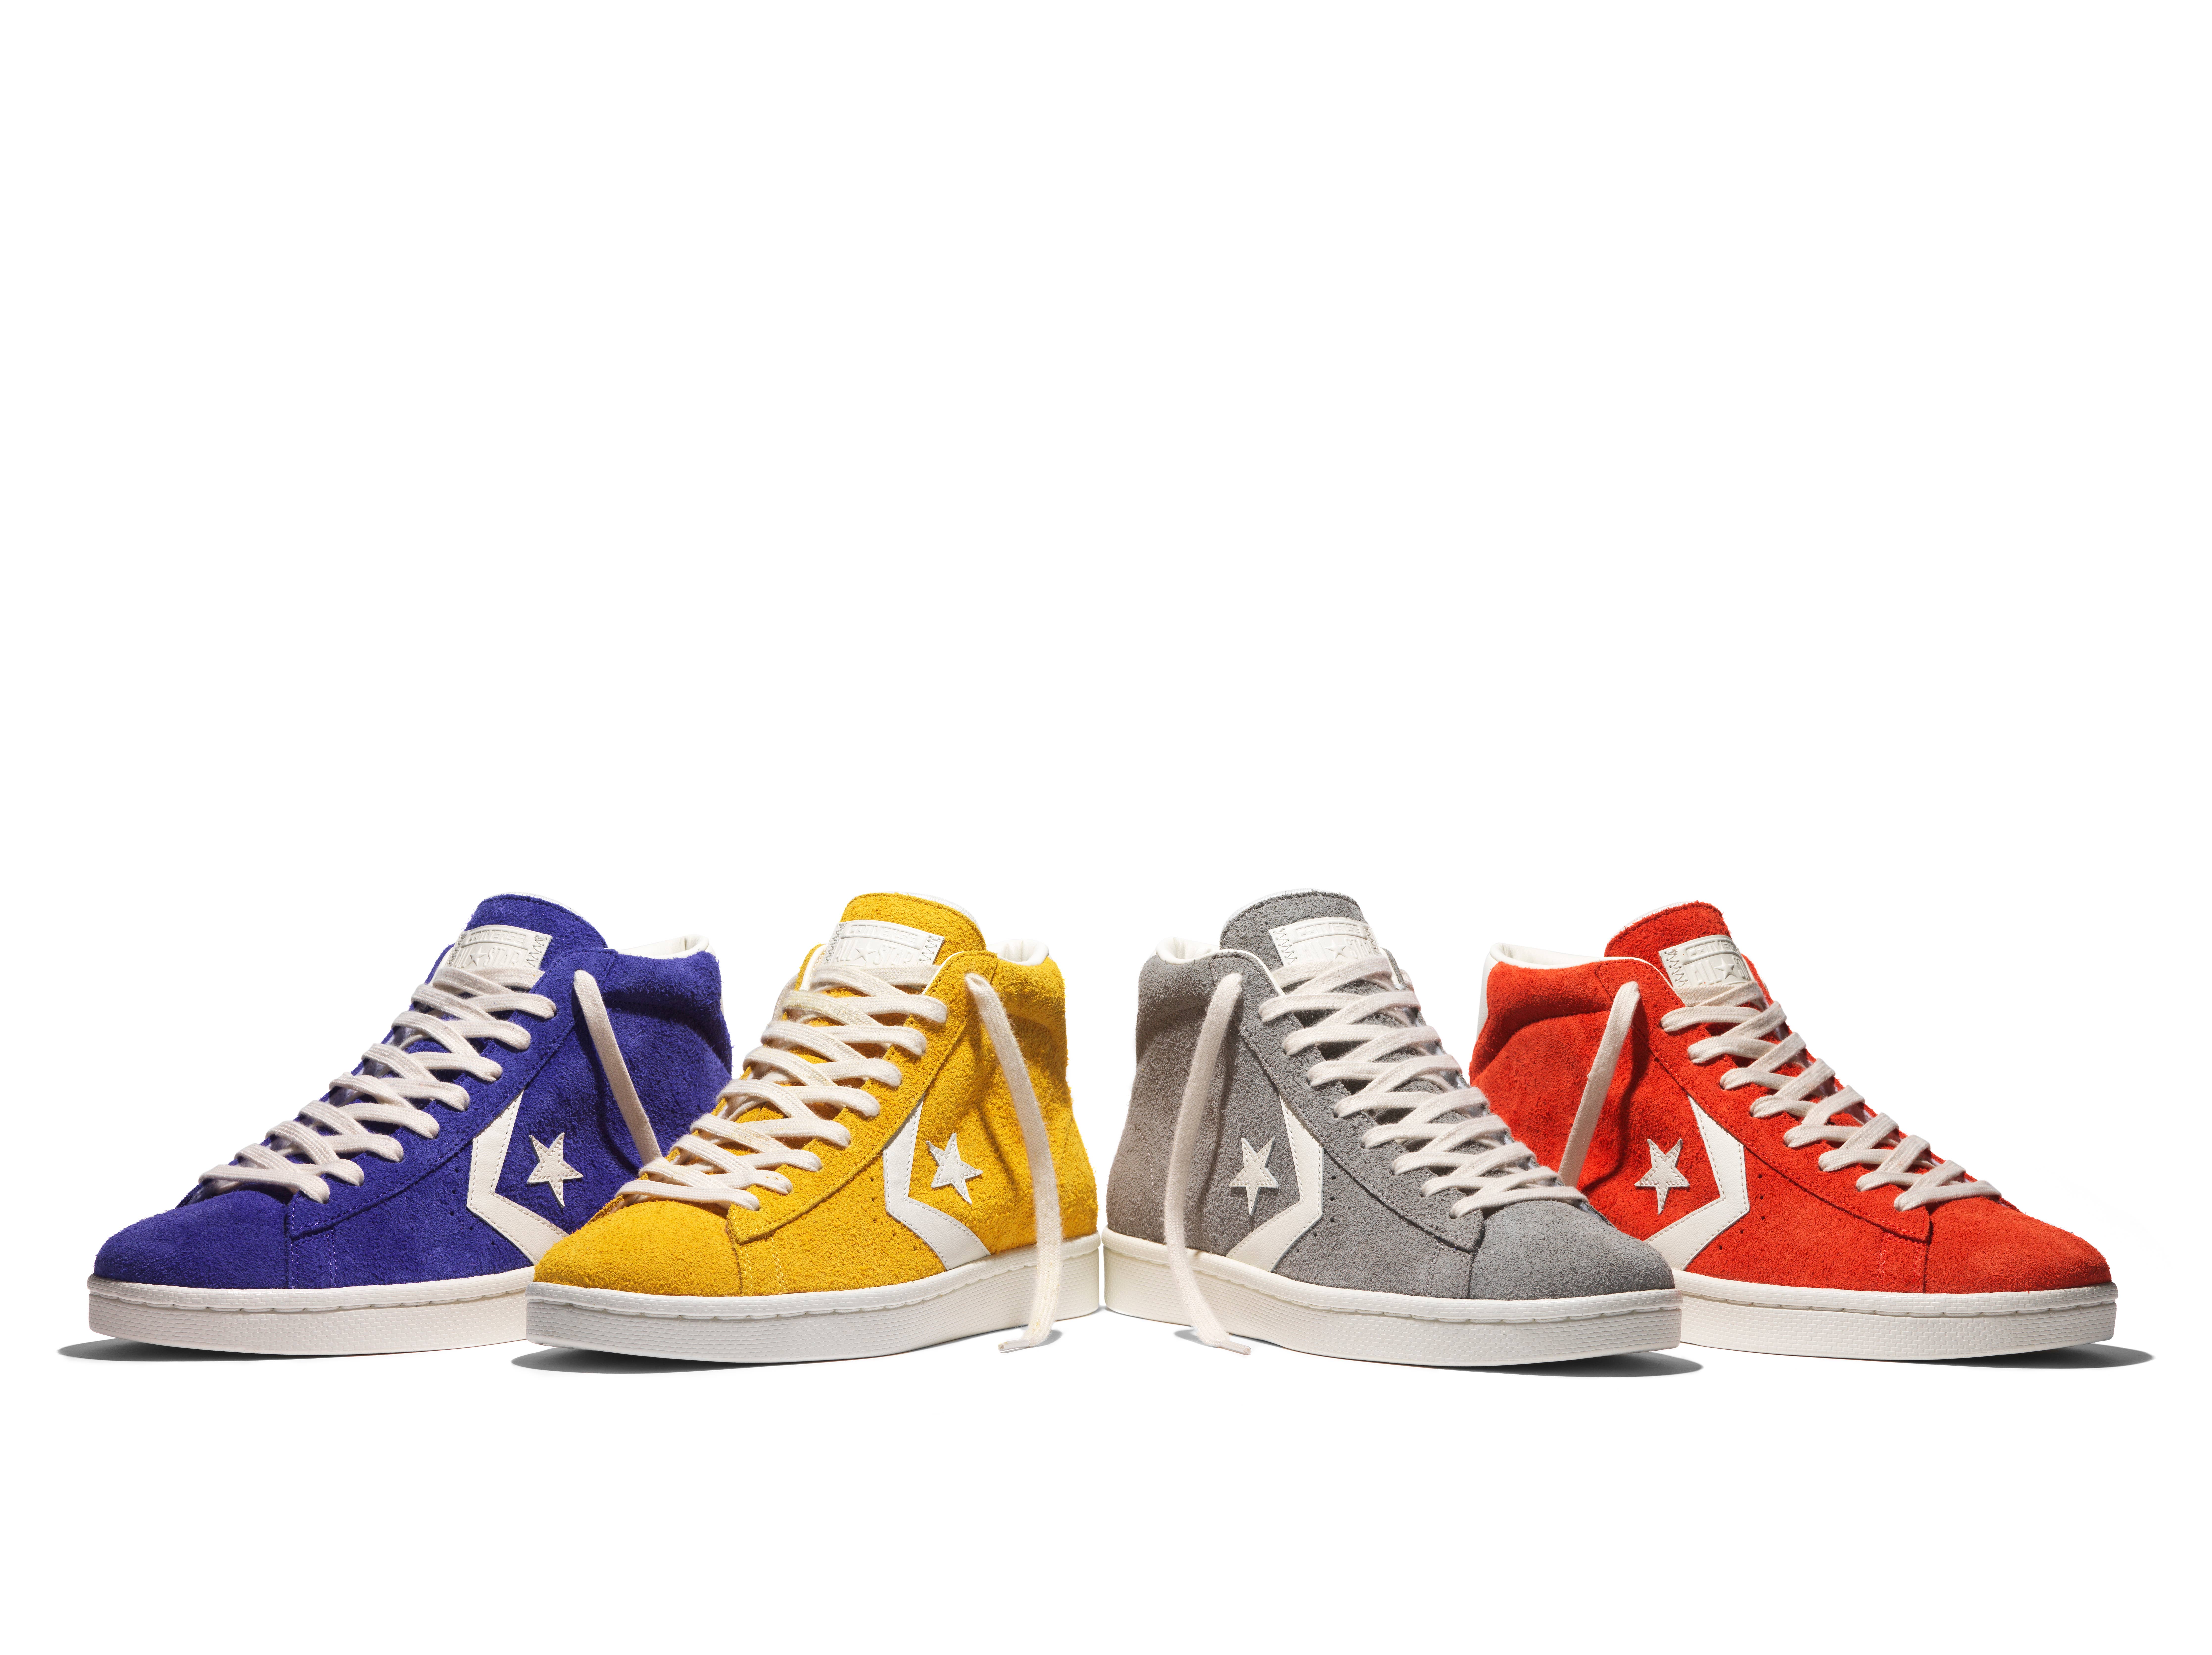 Converse Set To Pro Leather '76 Mono &amp; Vintage Suede Collections | Complex